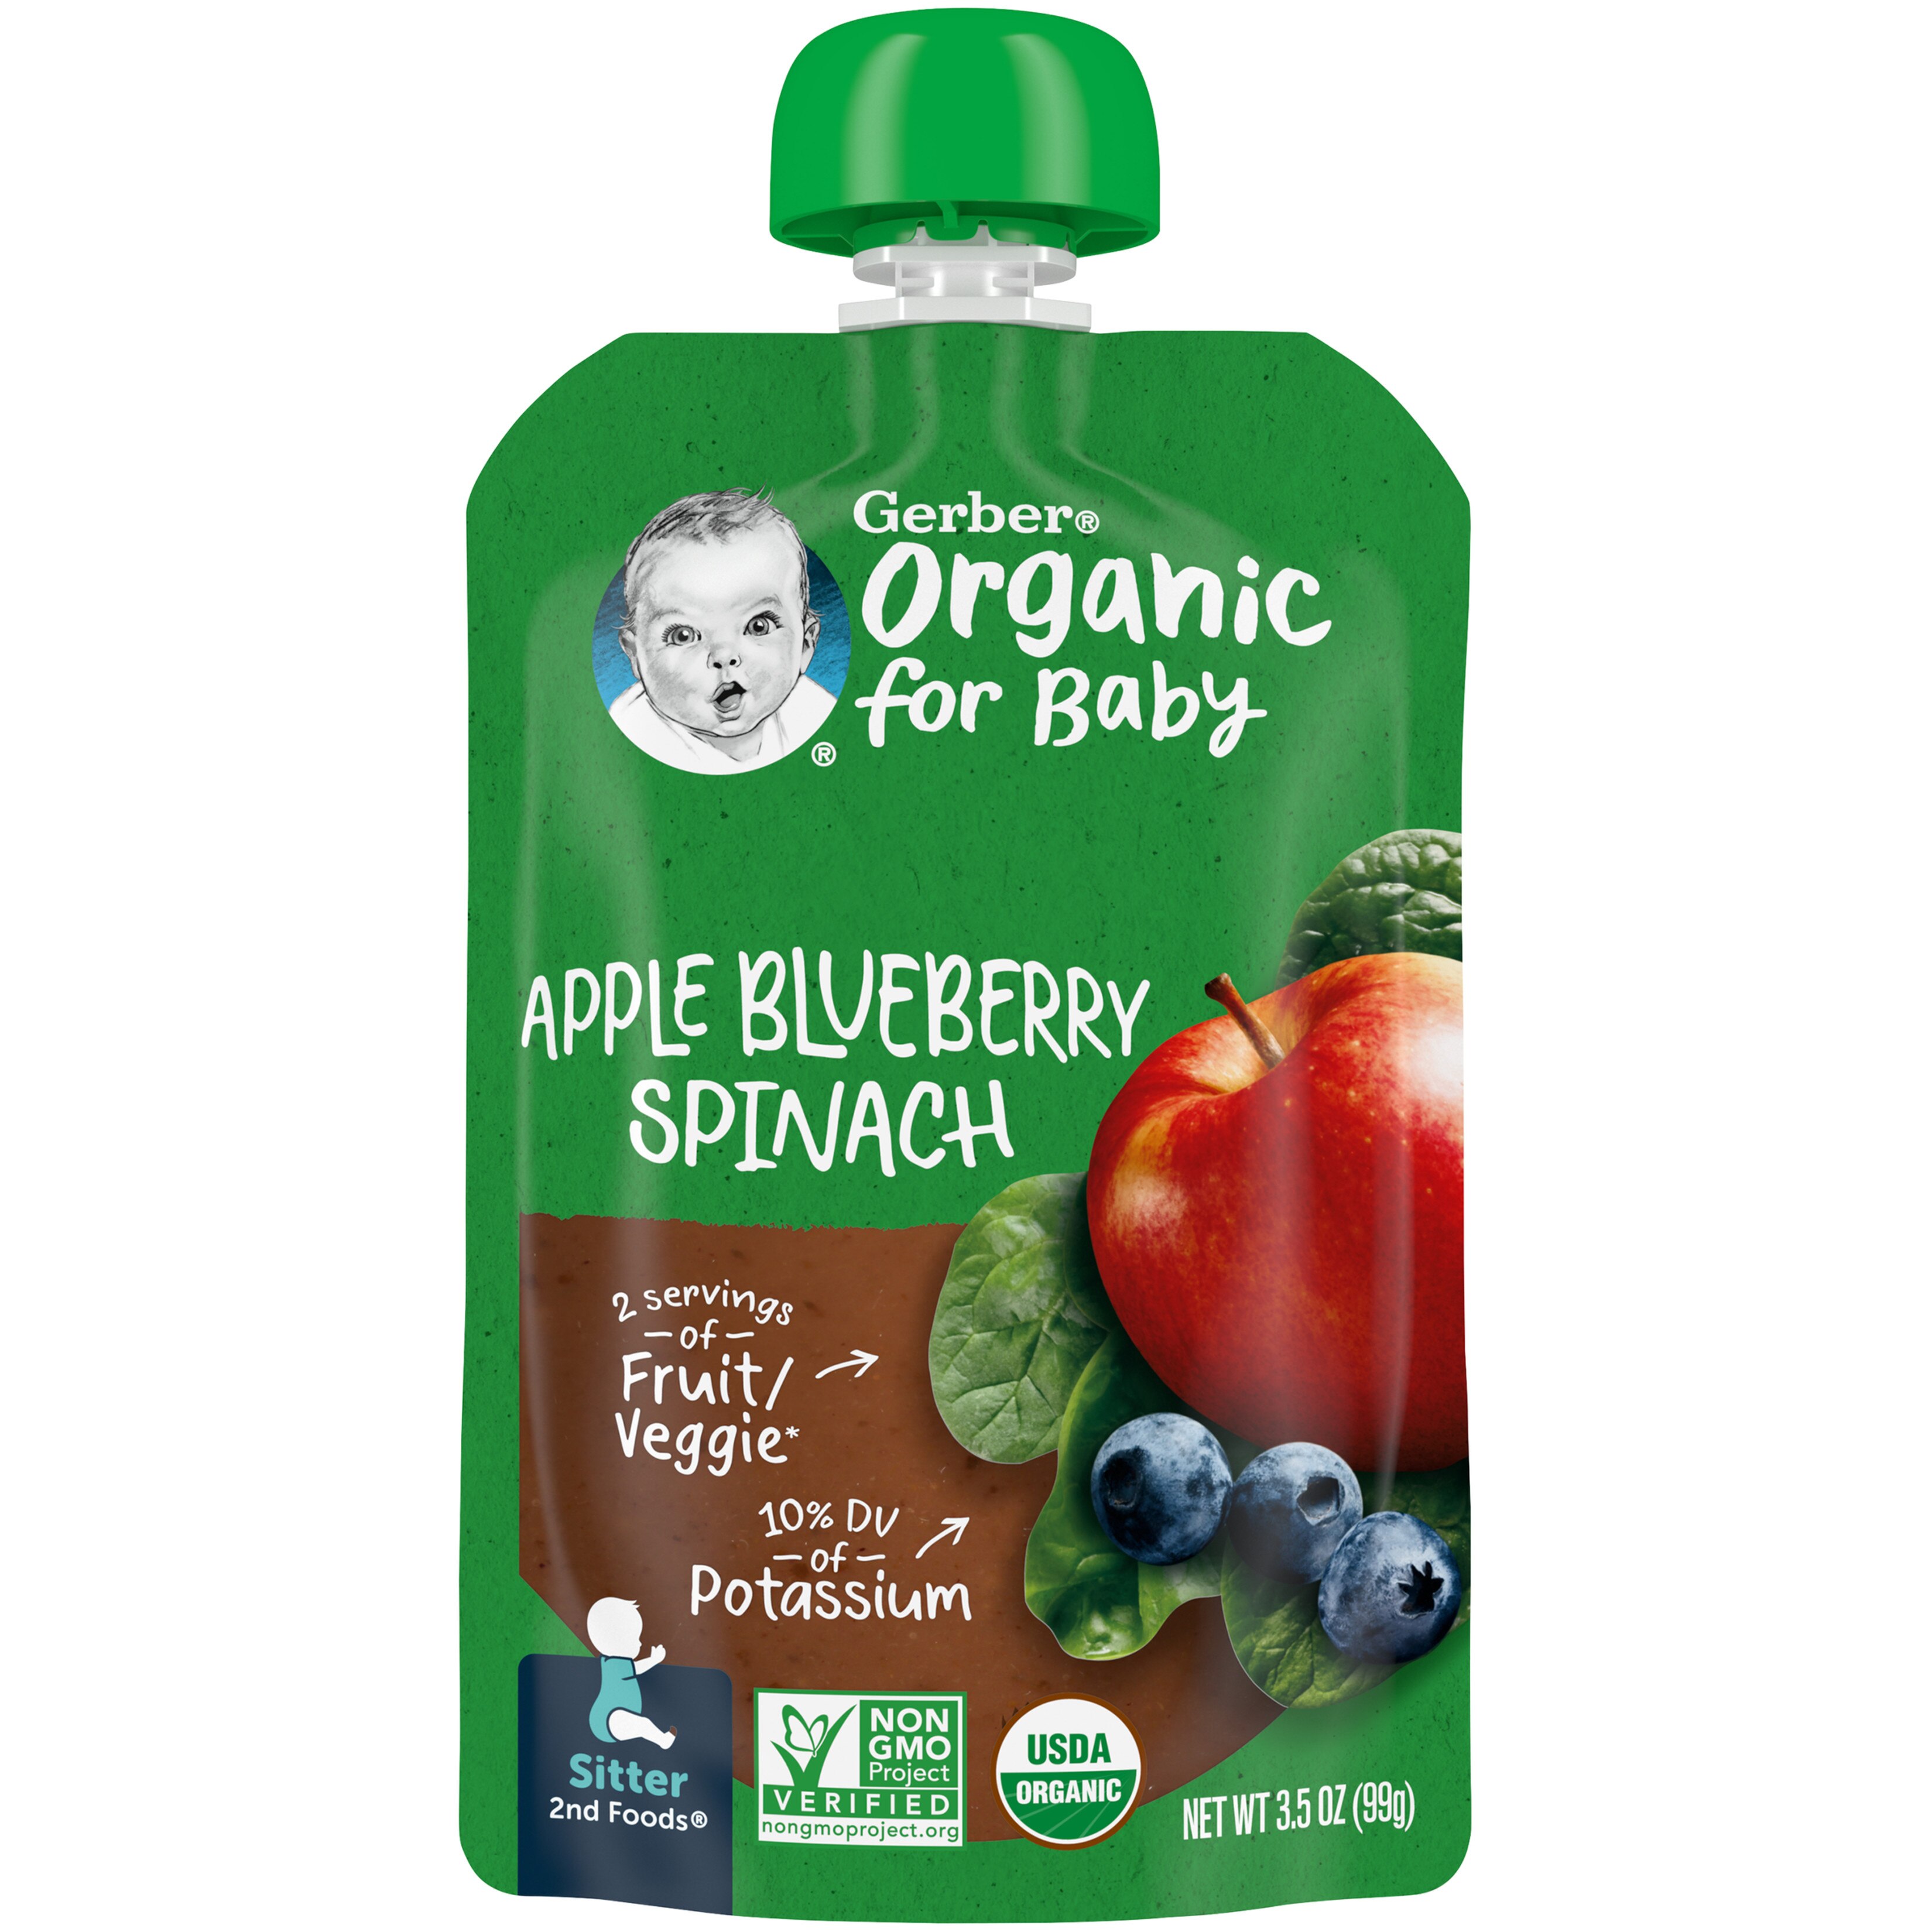  Gerber Organic Pouches, Sitter, Apple Blueberry Spinach, 3.5 OZ 